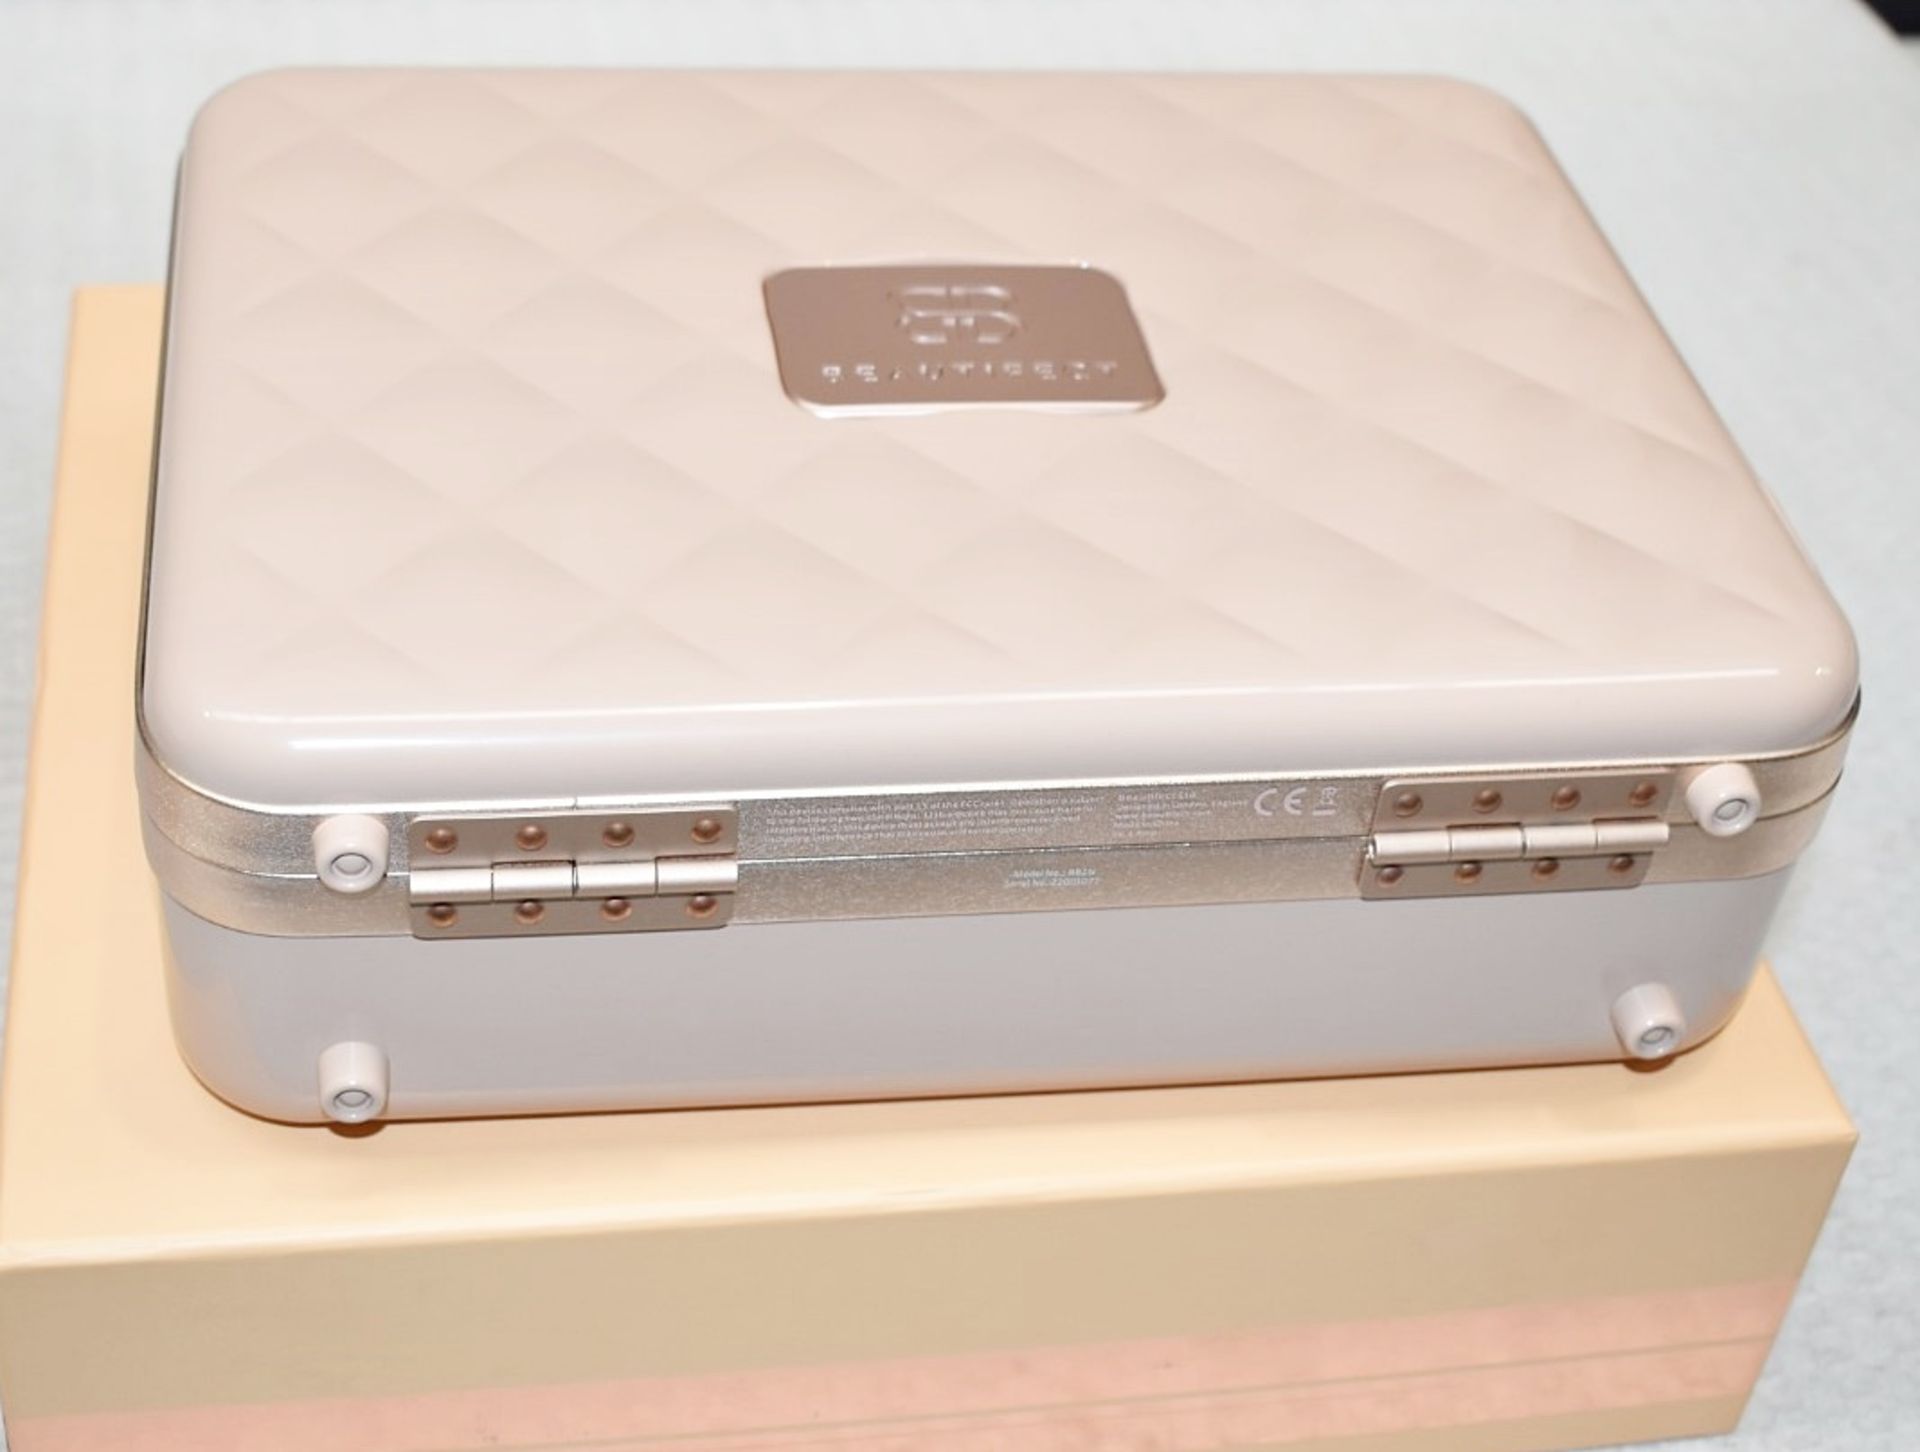 1 x BEAUTIFECT 'Beautifect Box' Make-Up Carry Case With Built-in Mirror - RRP £279.00 - Image 5 of 13